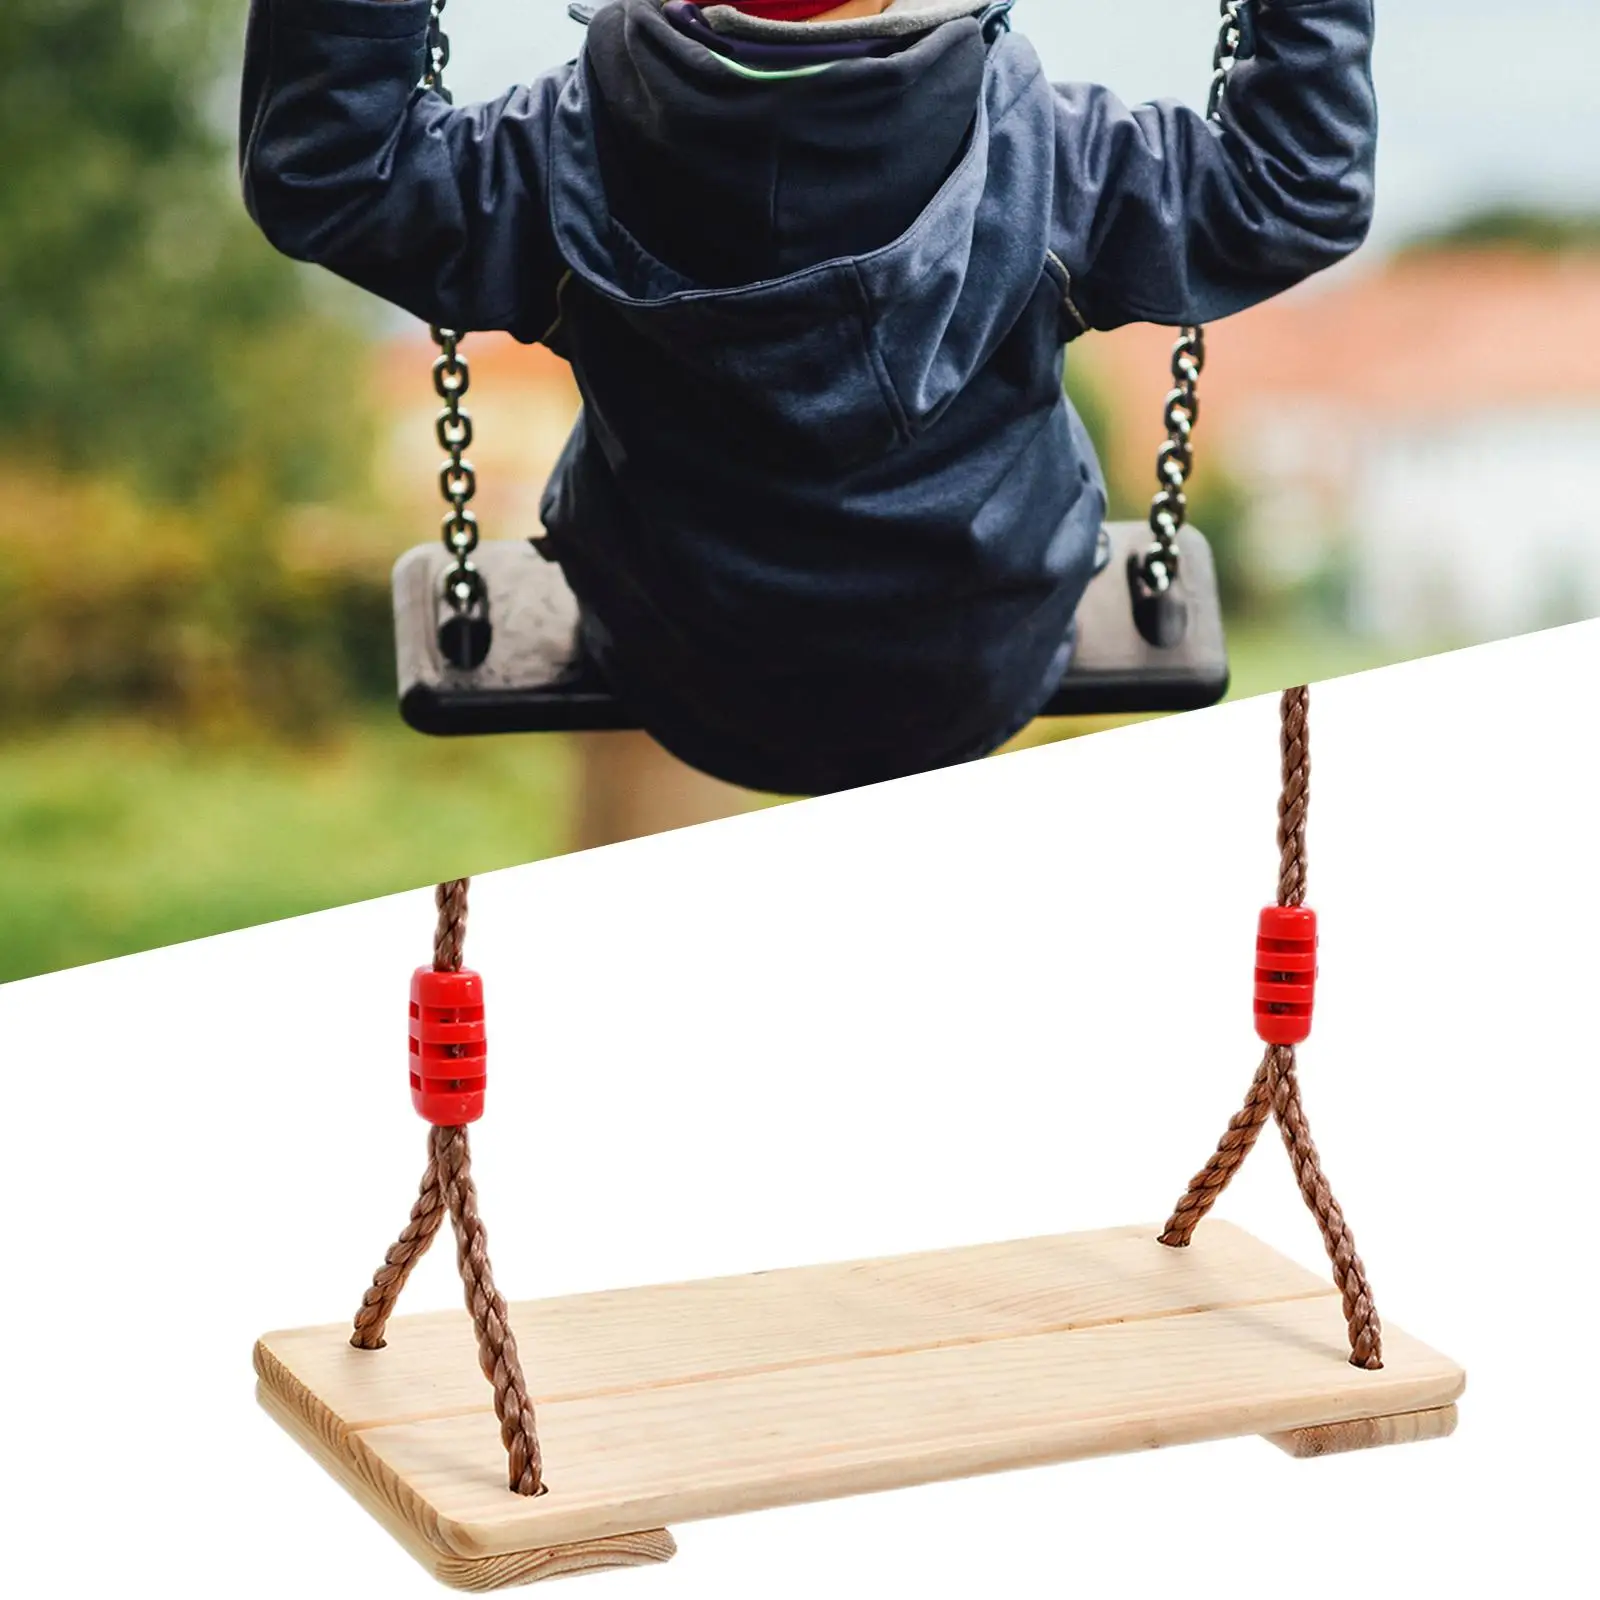 Kids Wooden Swing Garden Swing Seat Chair with Rope Toddler Toys Durable Hanging Swing for Park Garden Outdoor Backyard Tree